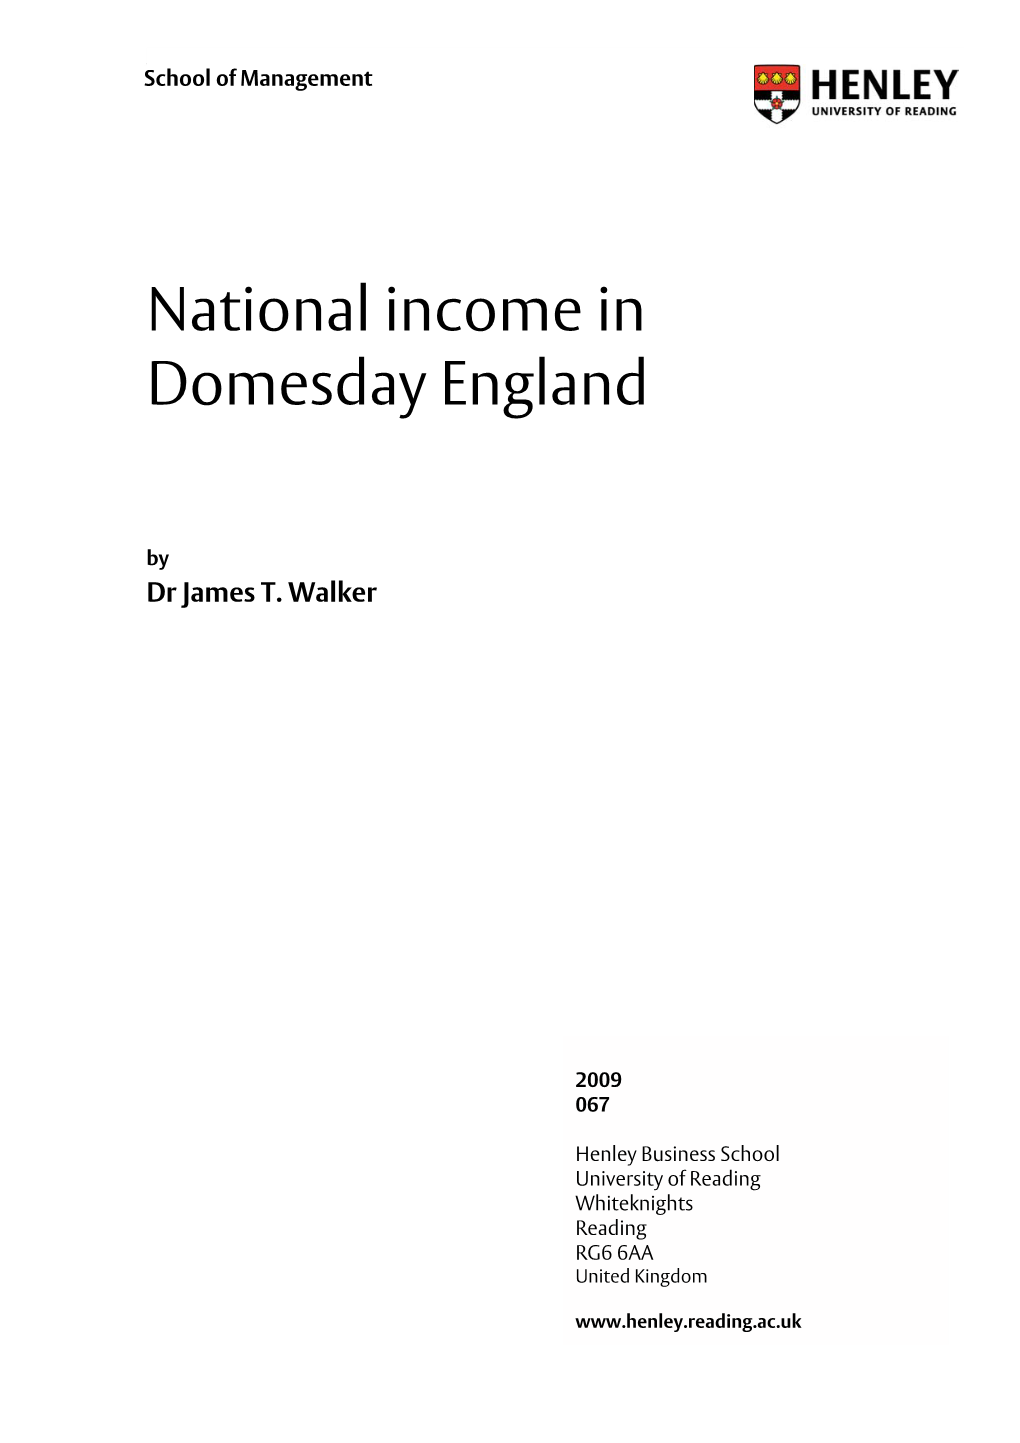 National Income in Domesday England